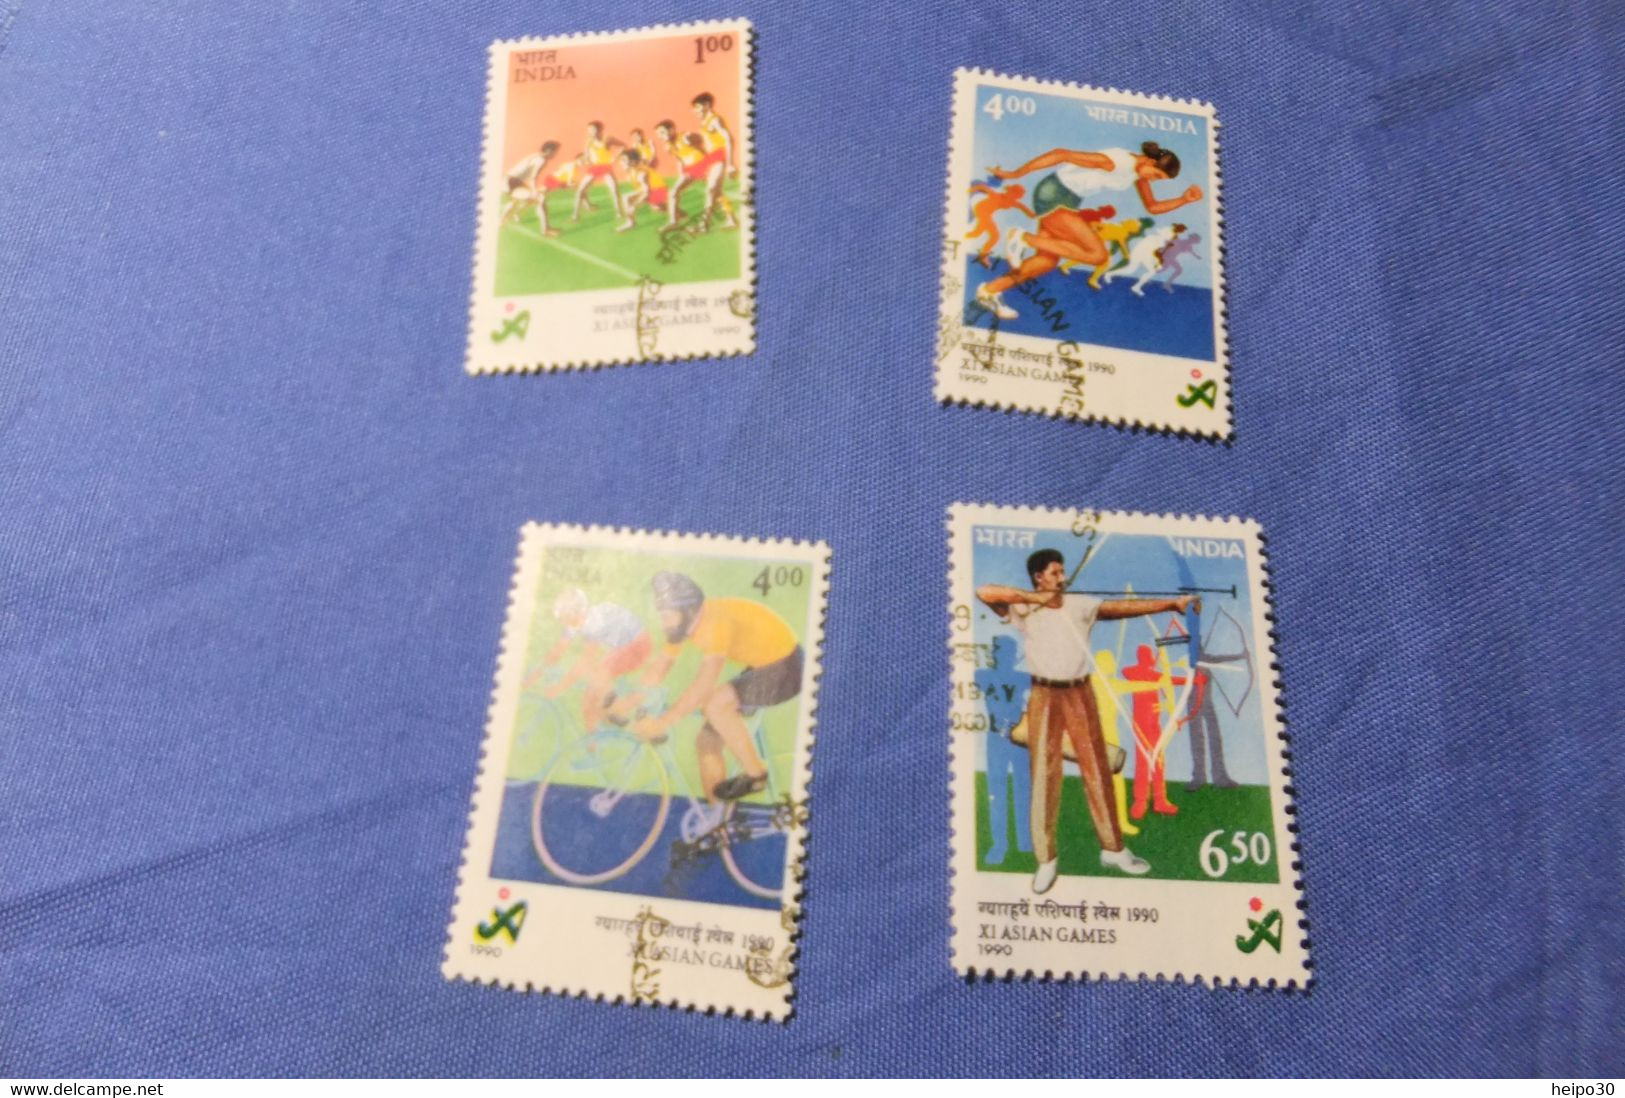 India 1990 Michel 1286 - 1289 Asienspiele - Used Stamps